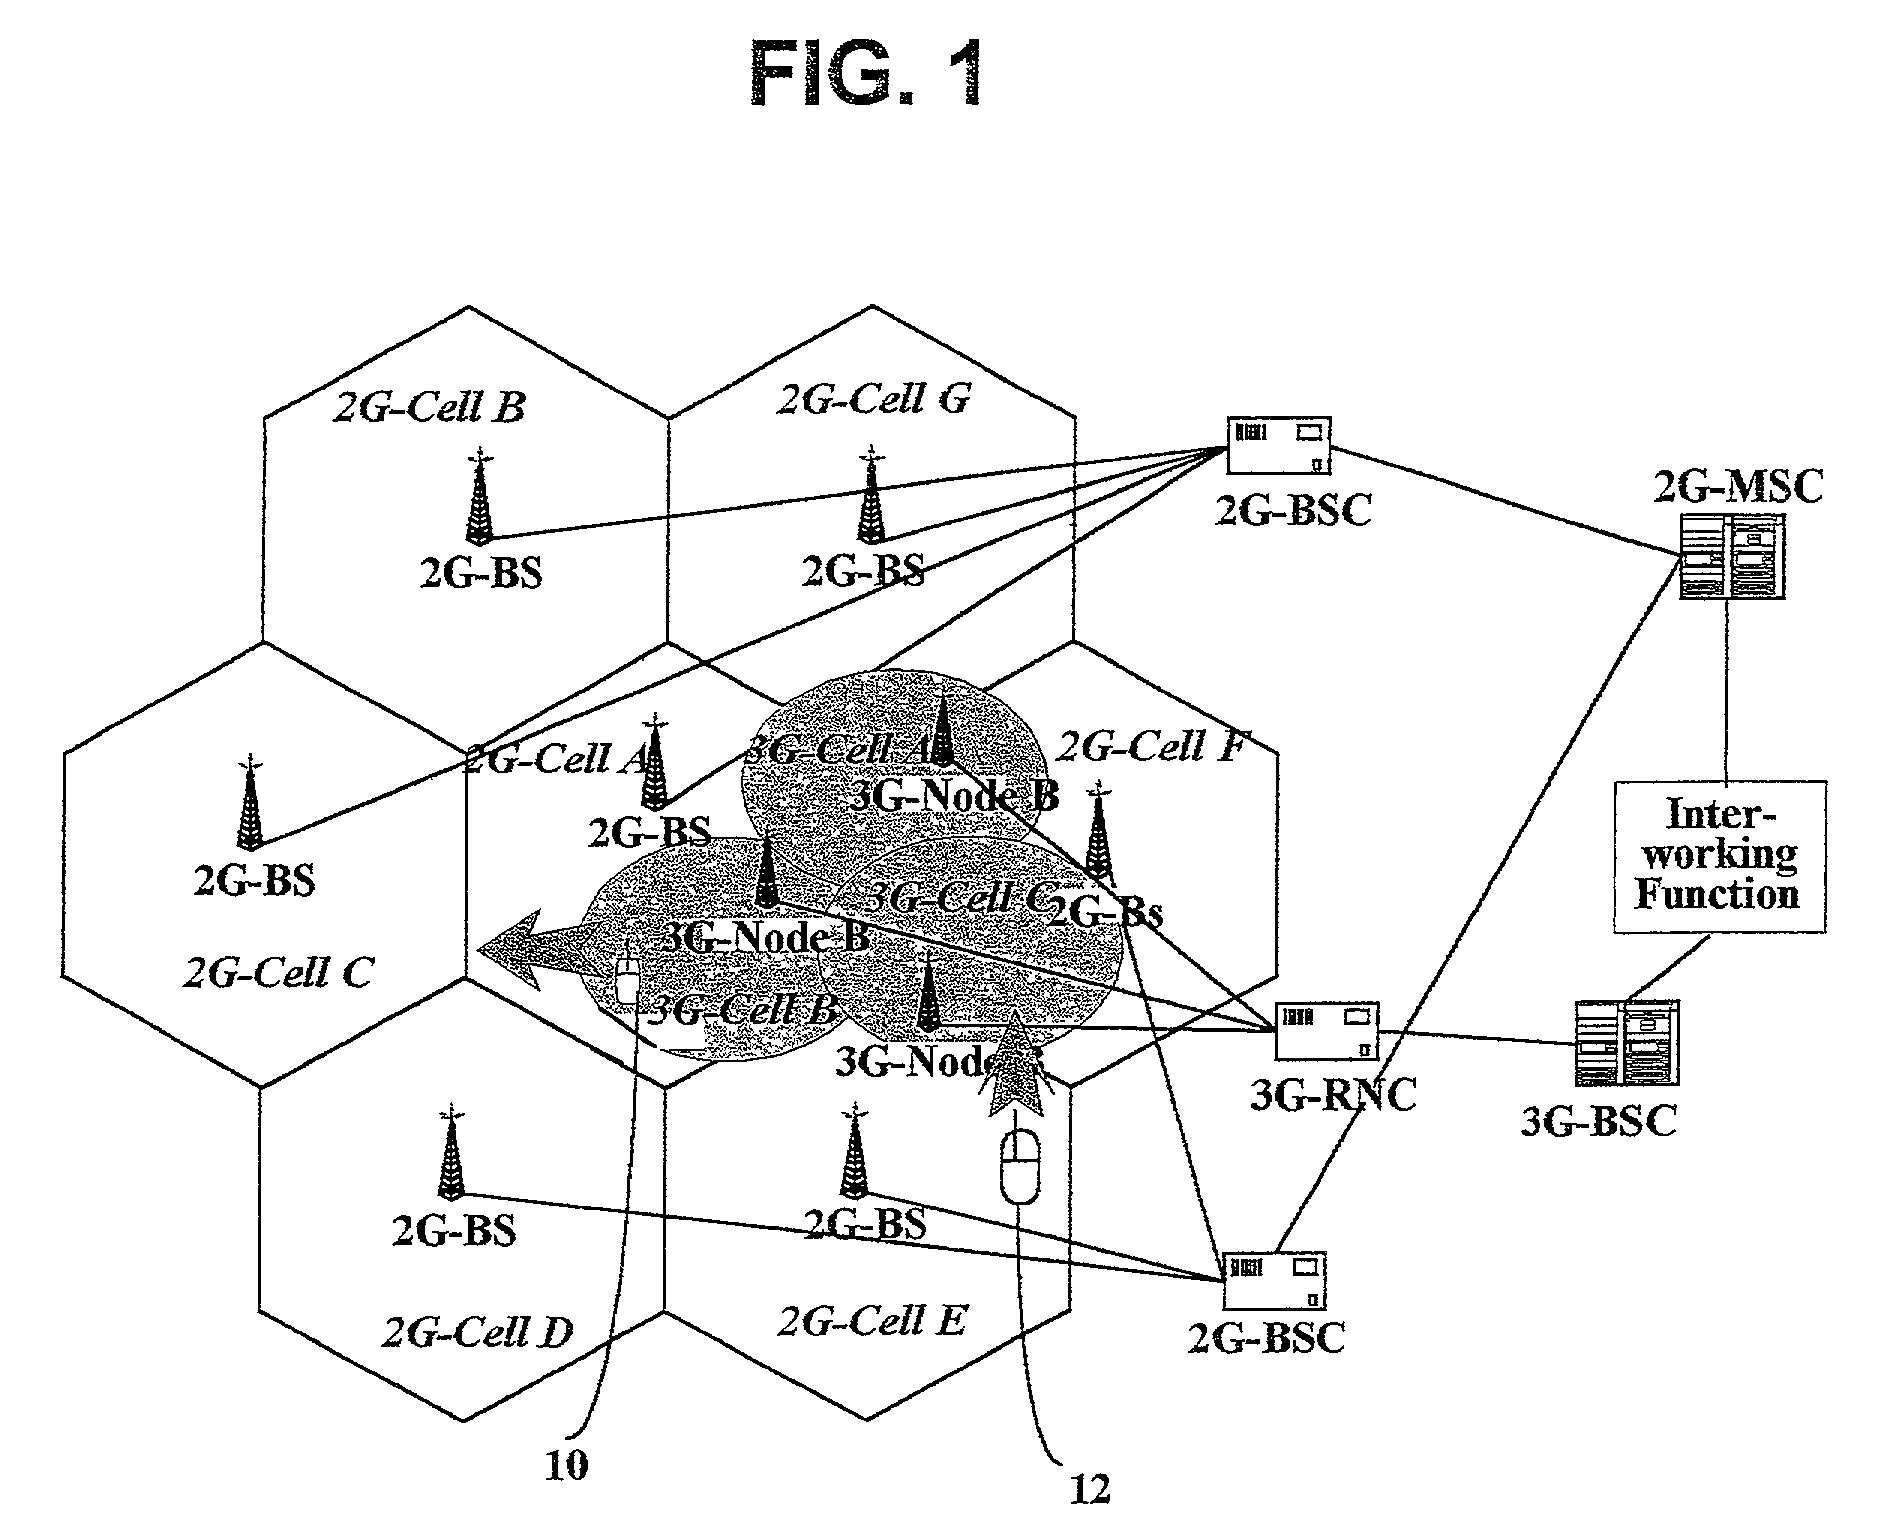 Method for supporting hand-off decision for guaranteeing mobility of a dual-mode mobile terminal between different mobile communication network systems